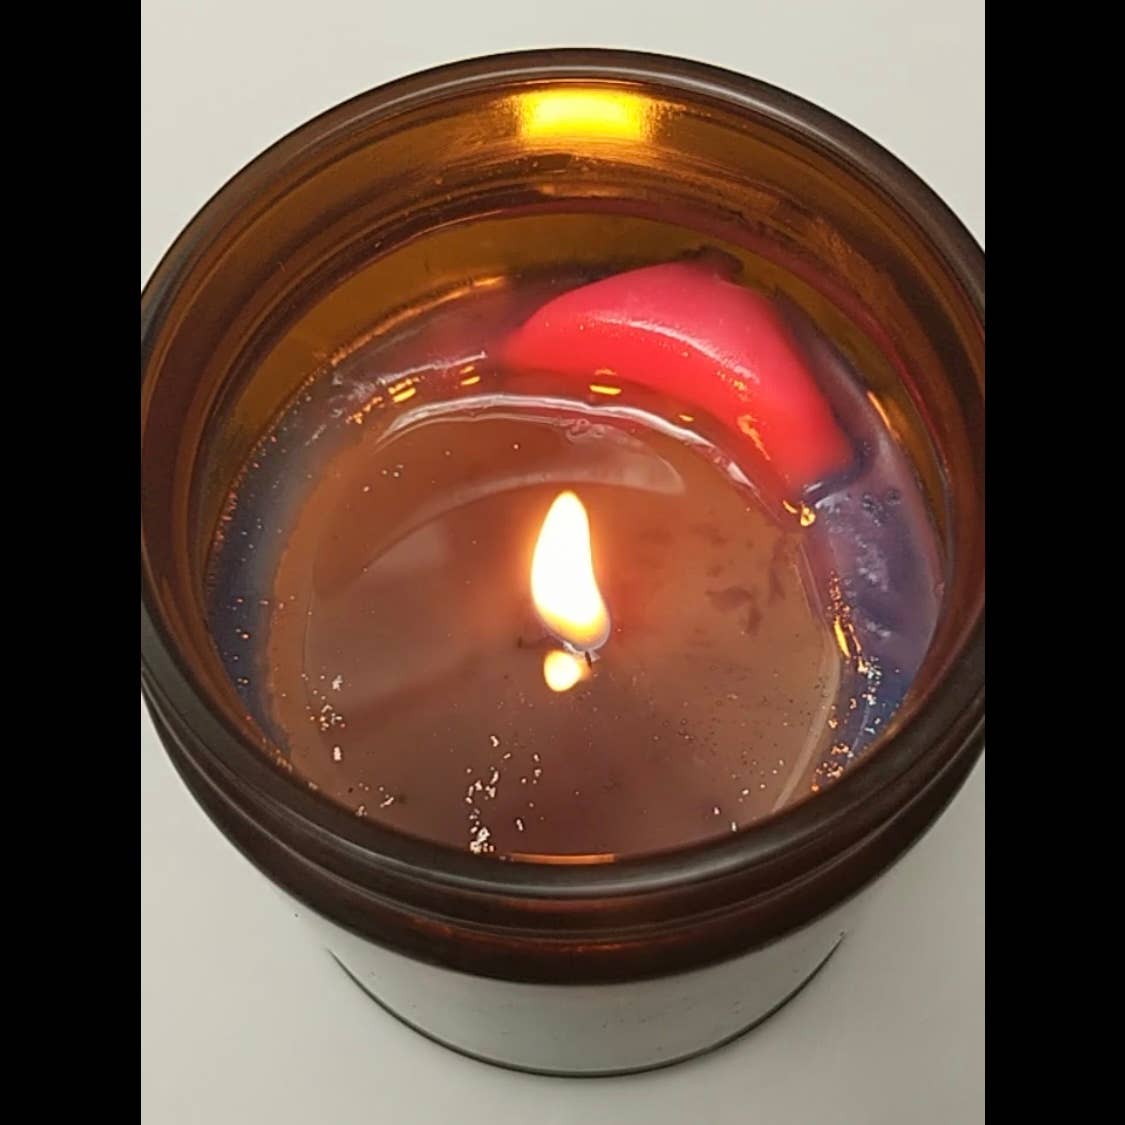 Cherry Lips, Crystal Skies Candle